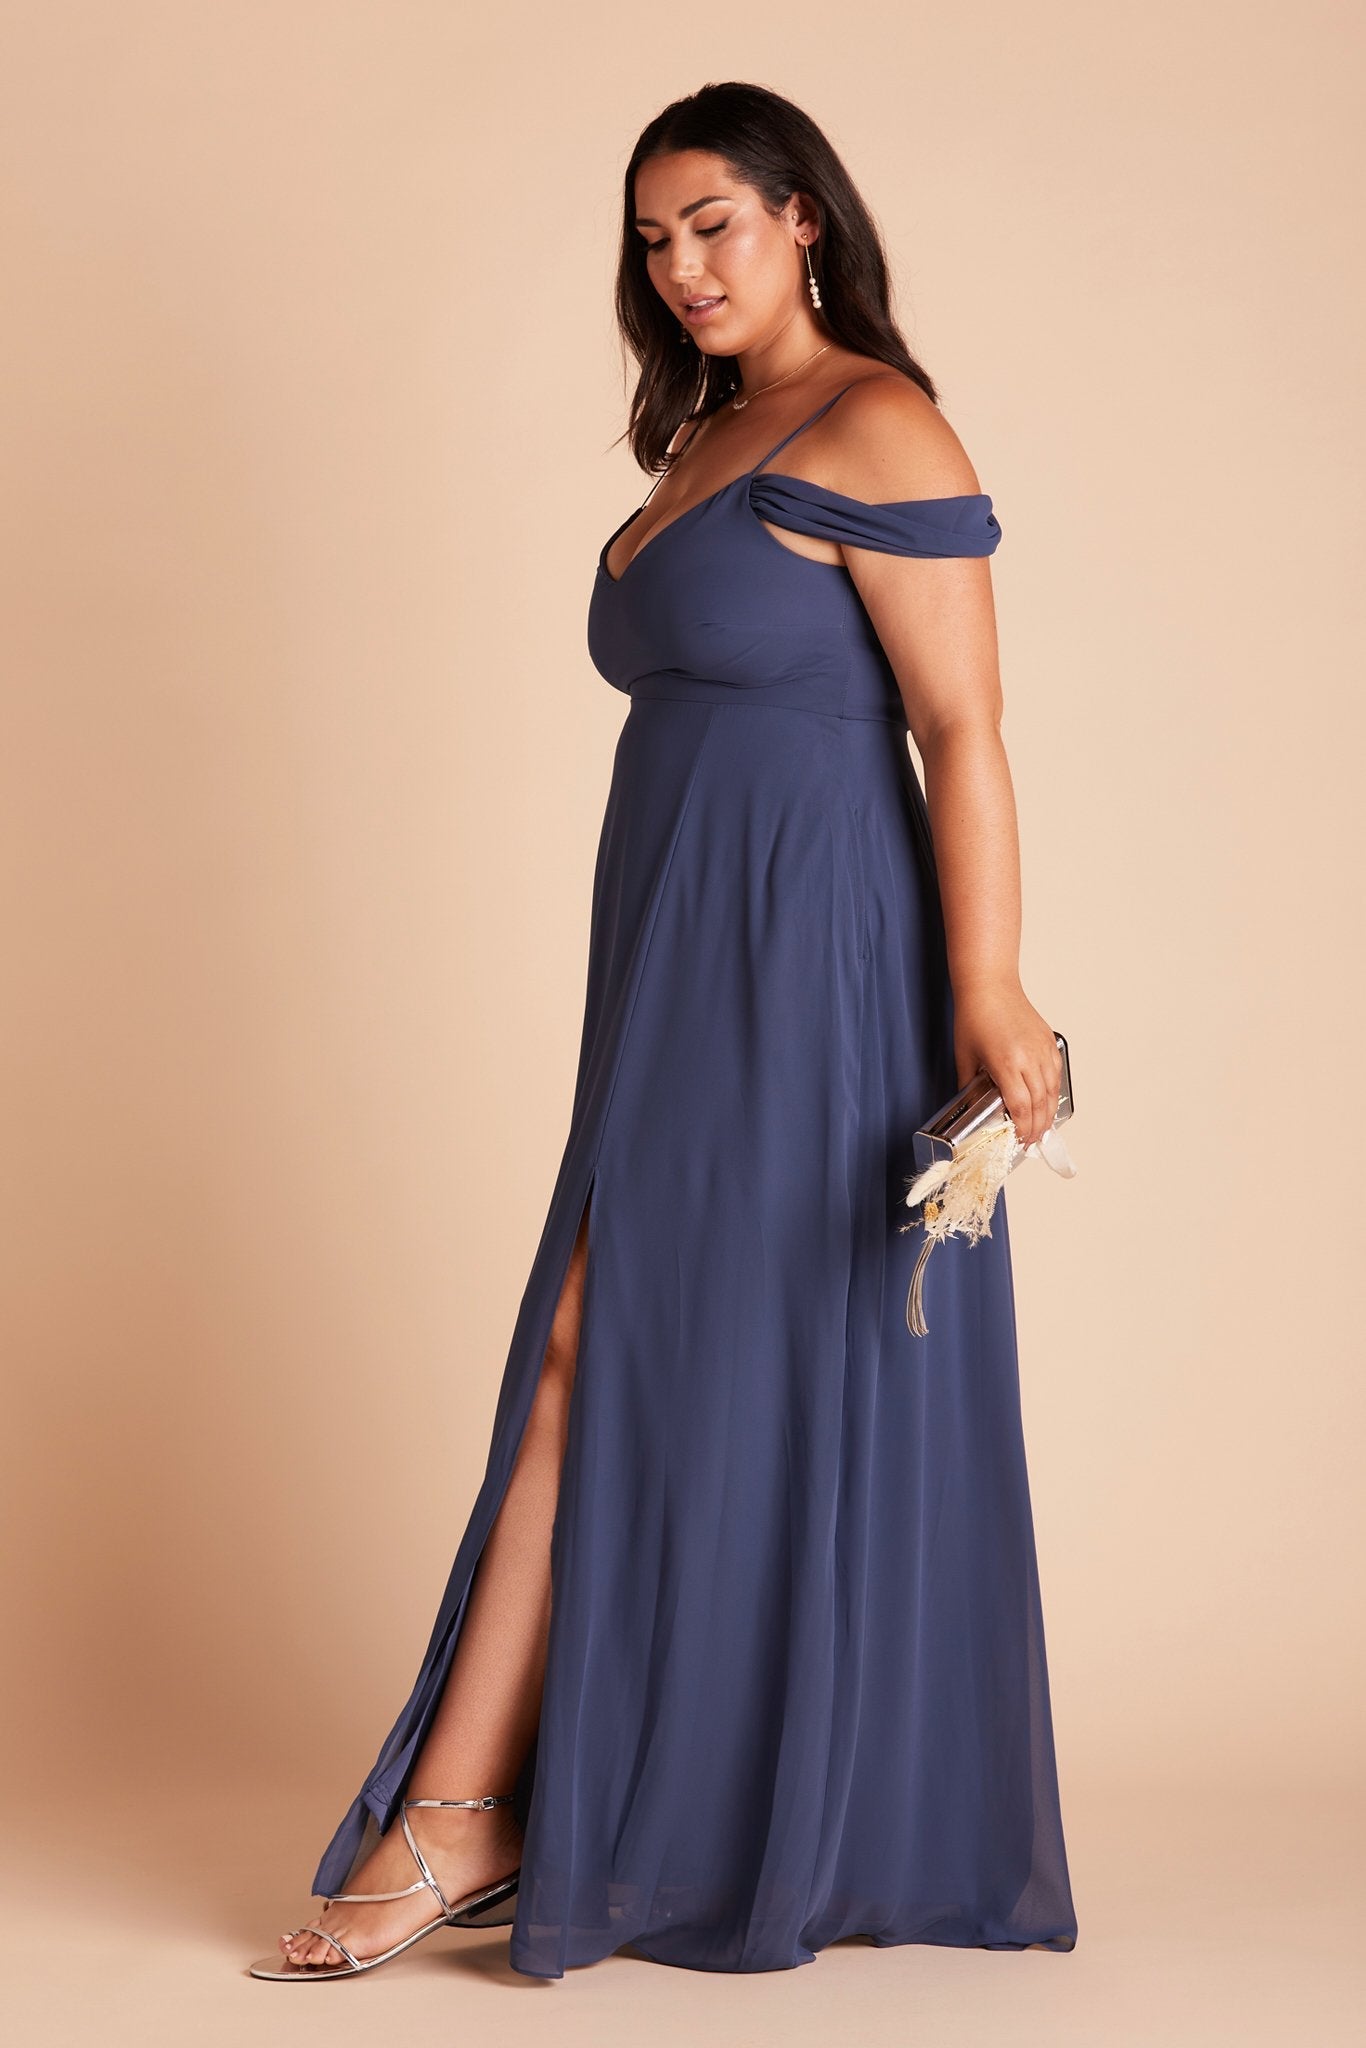 Devin convertible plus size bridesmaids dress with slit in slate blue chiffon by Birdy Grey, side view